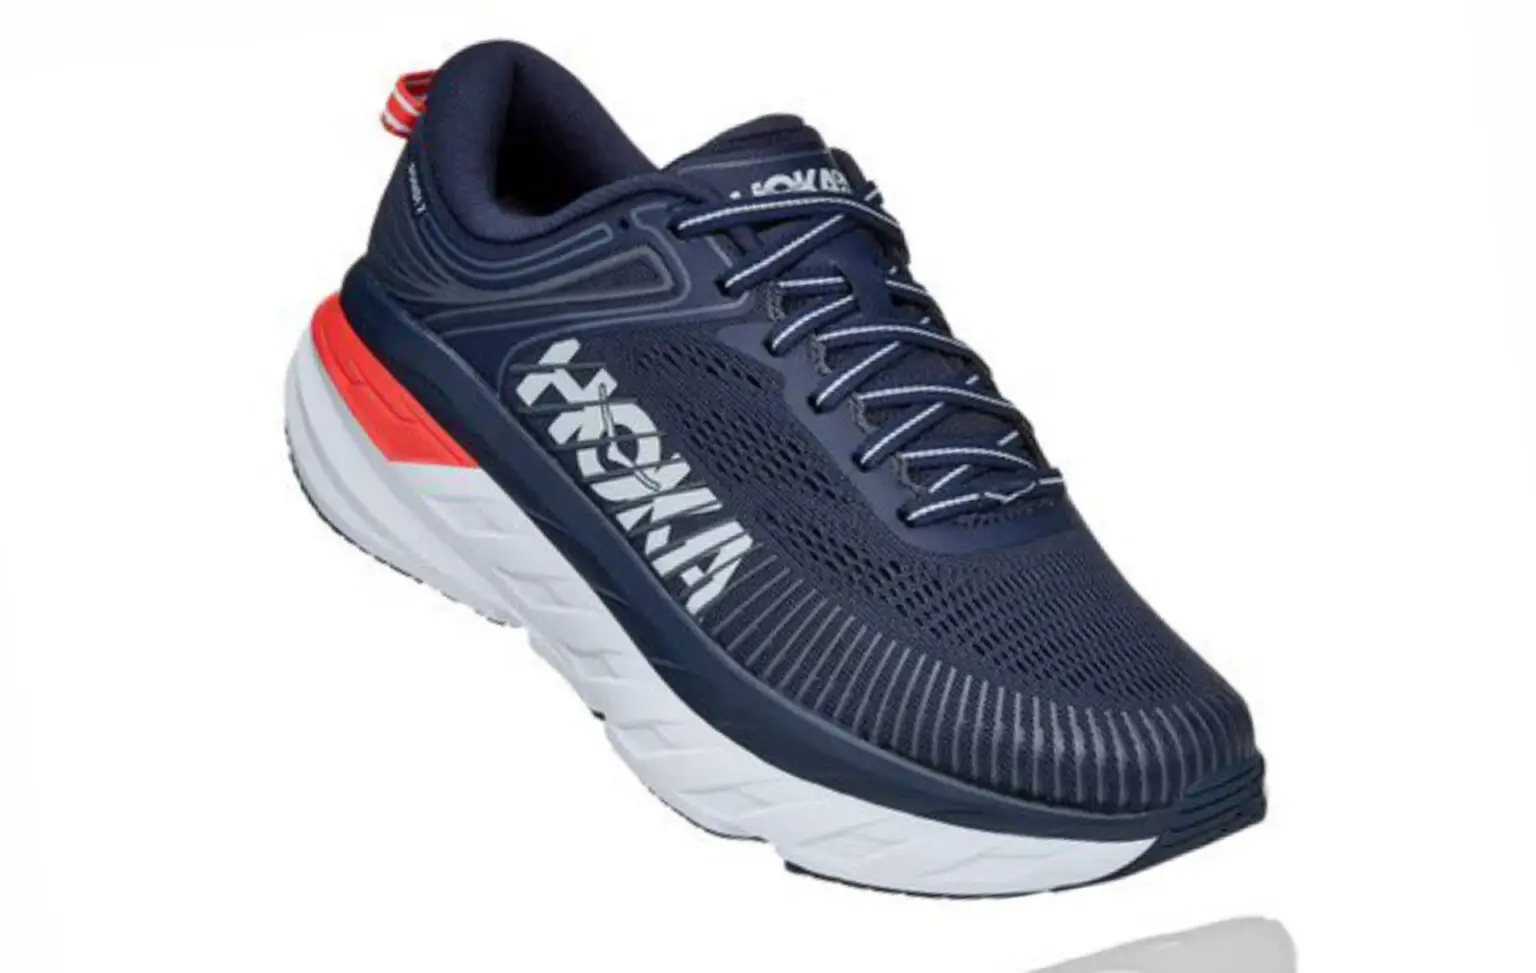 10 Best Hoka One One Shoes for Walking in 2023